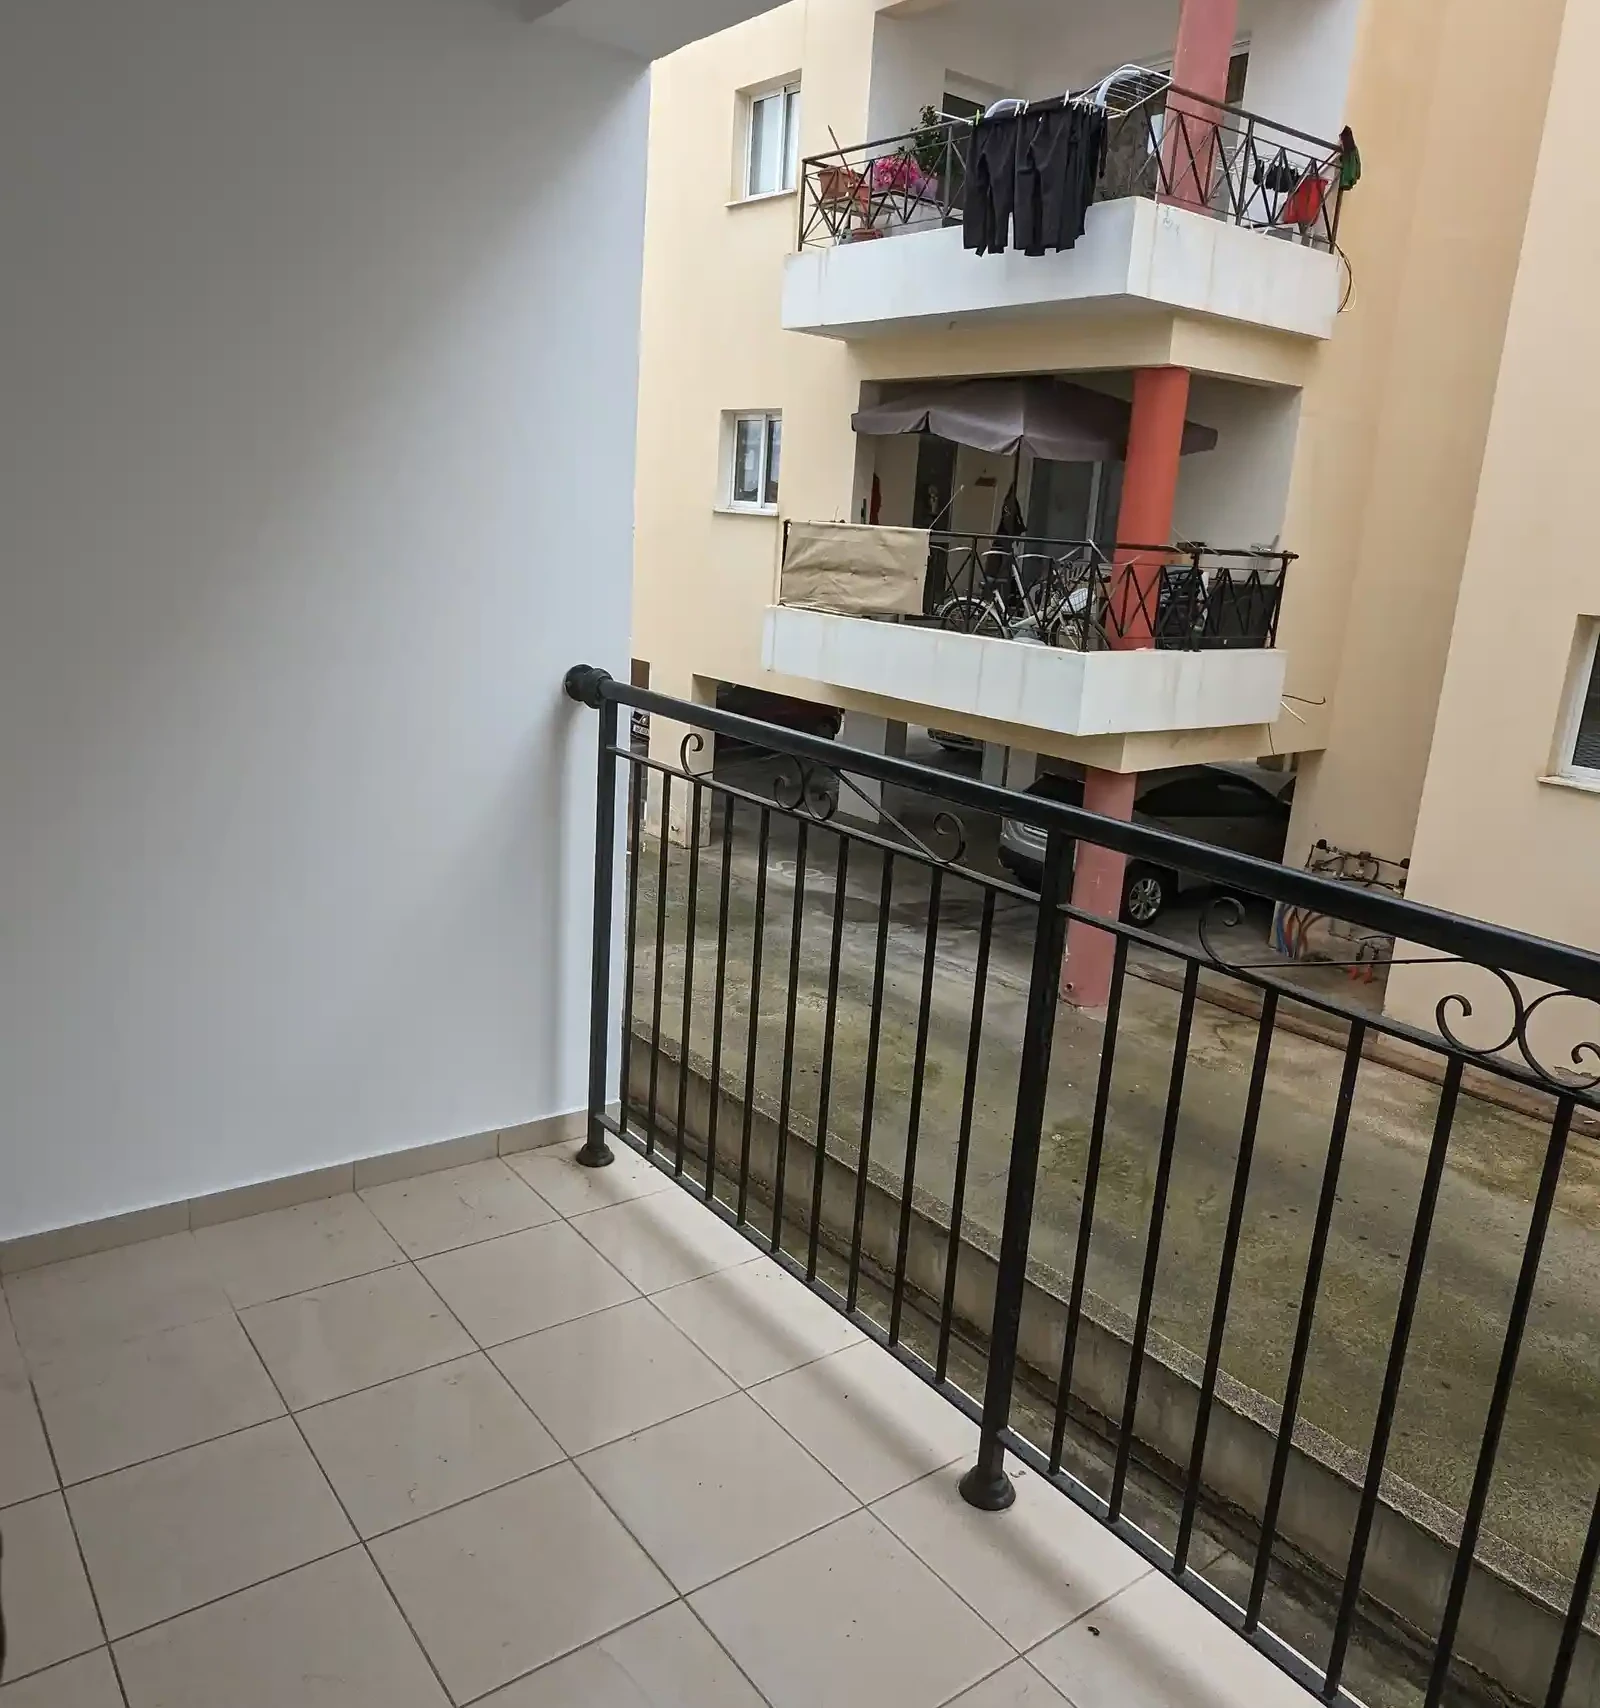 2-bedroom apartment fоr sаle €188.000, image 1